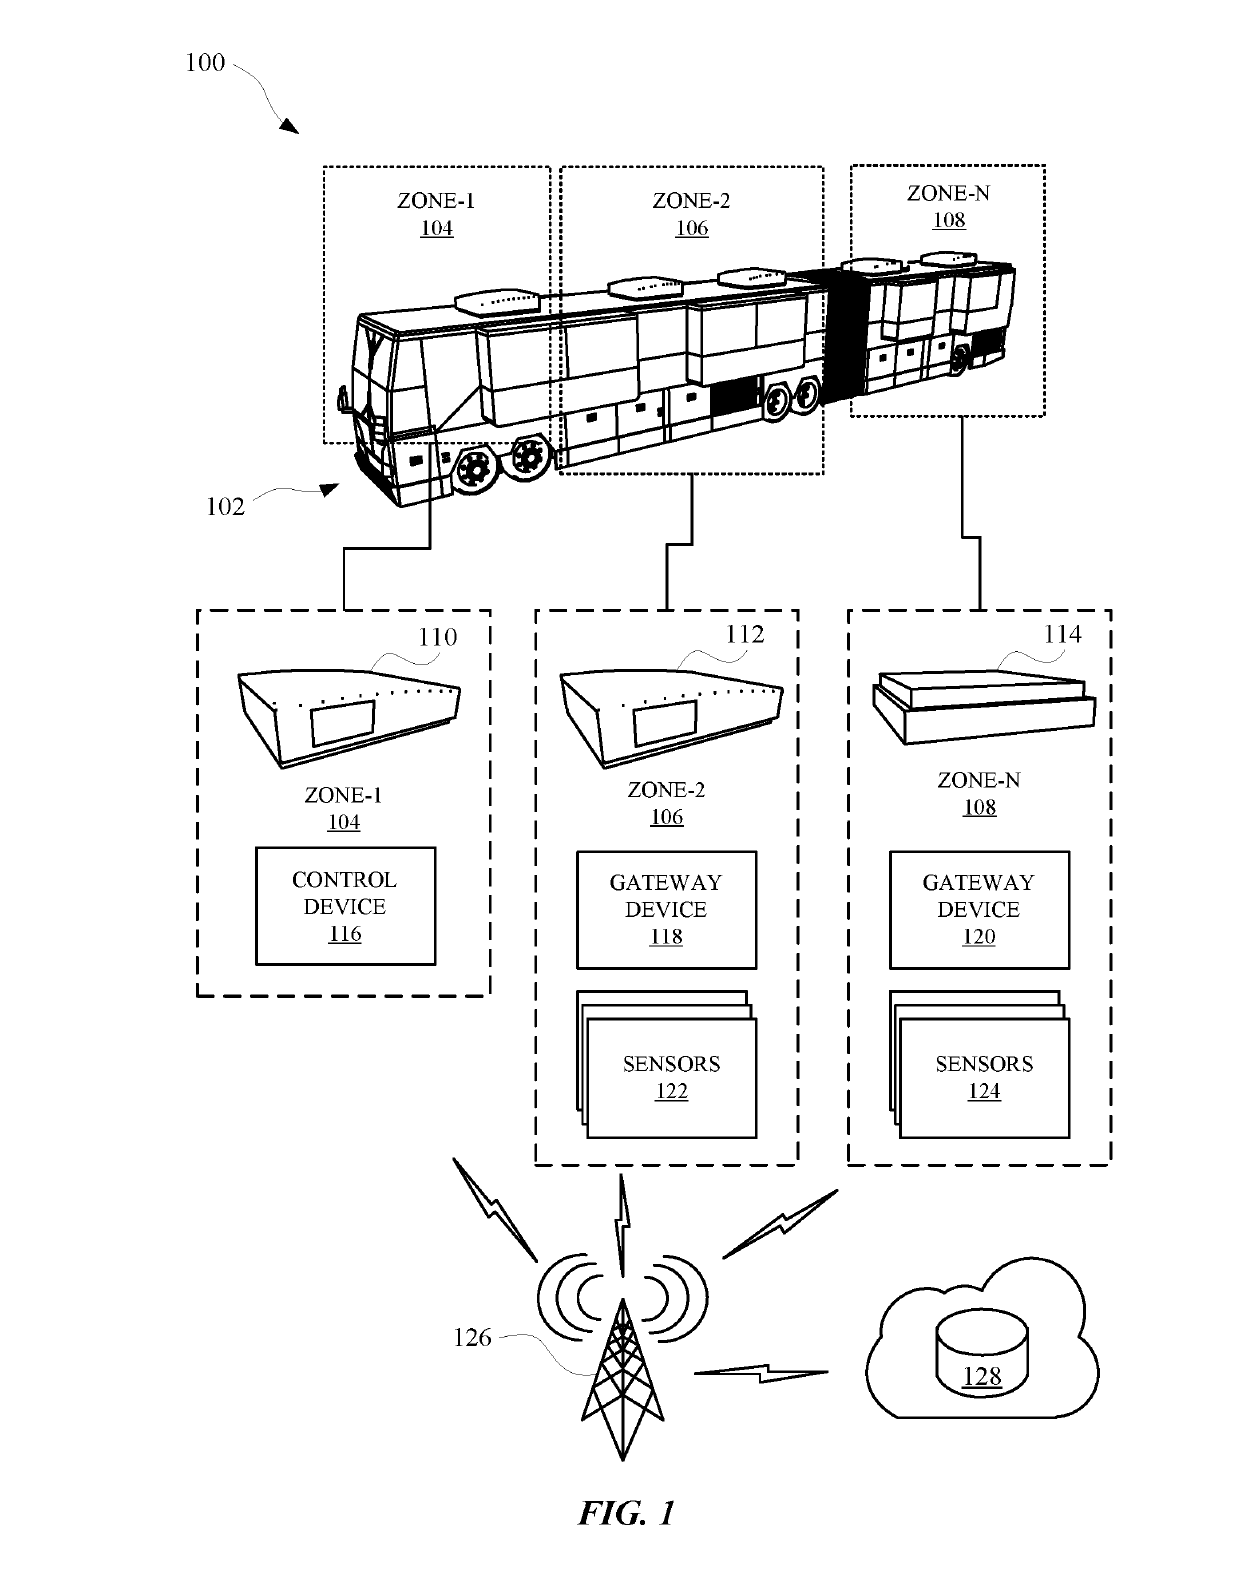 Systems, Methods, and Apparatuses for Providing Communications Between Climate Control Devices in a Recreational Vehicle